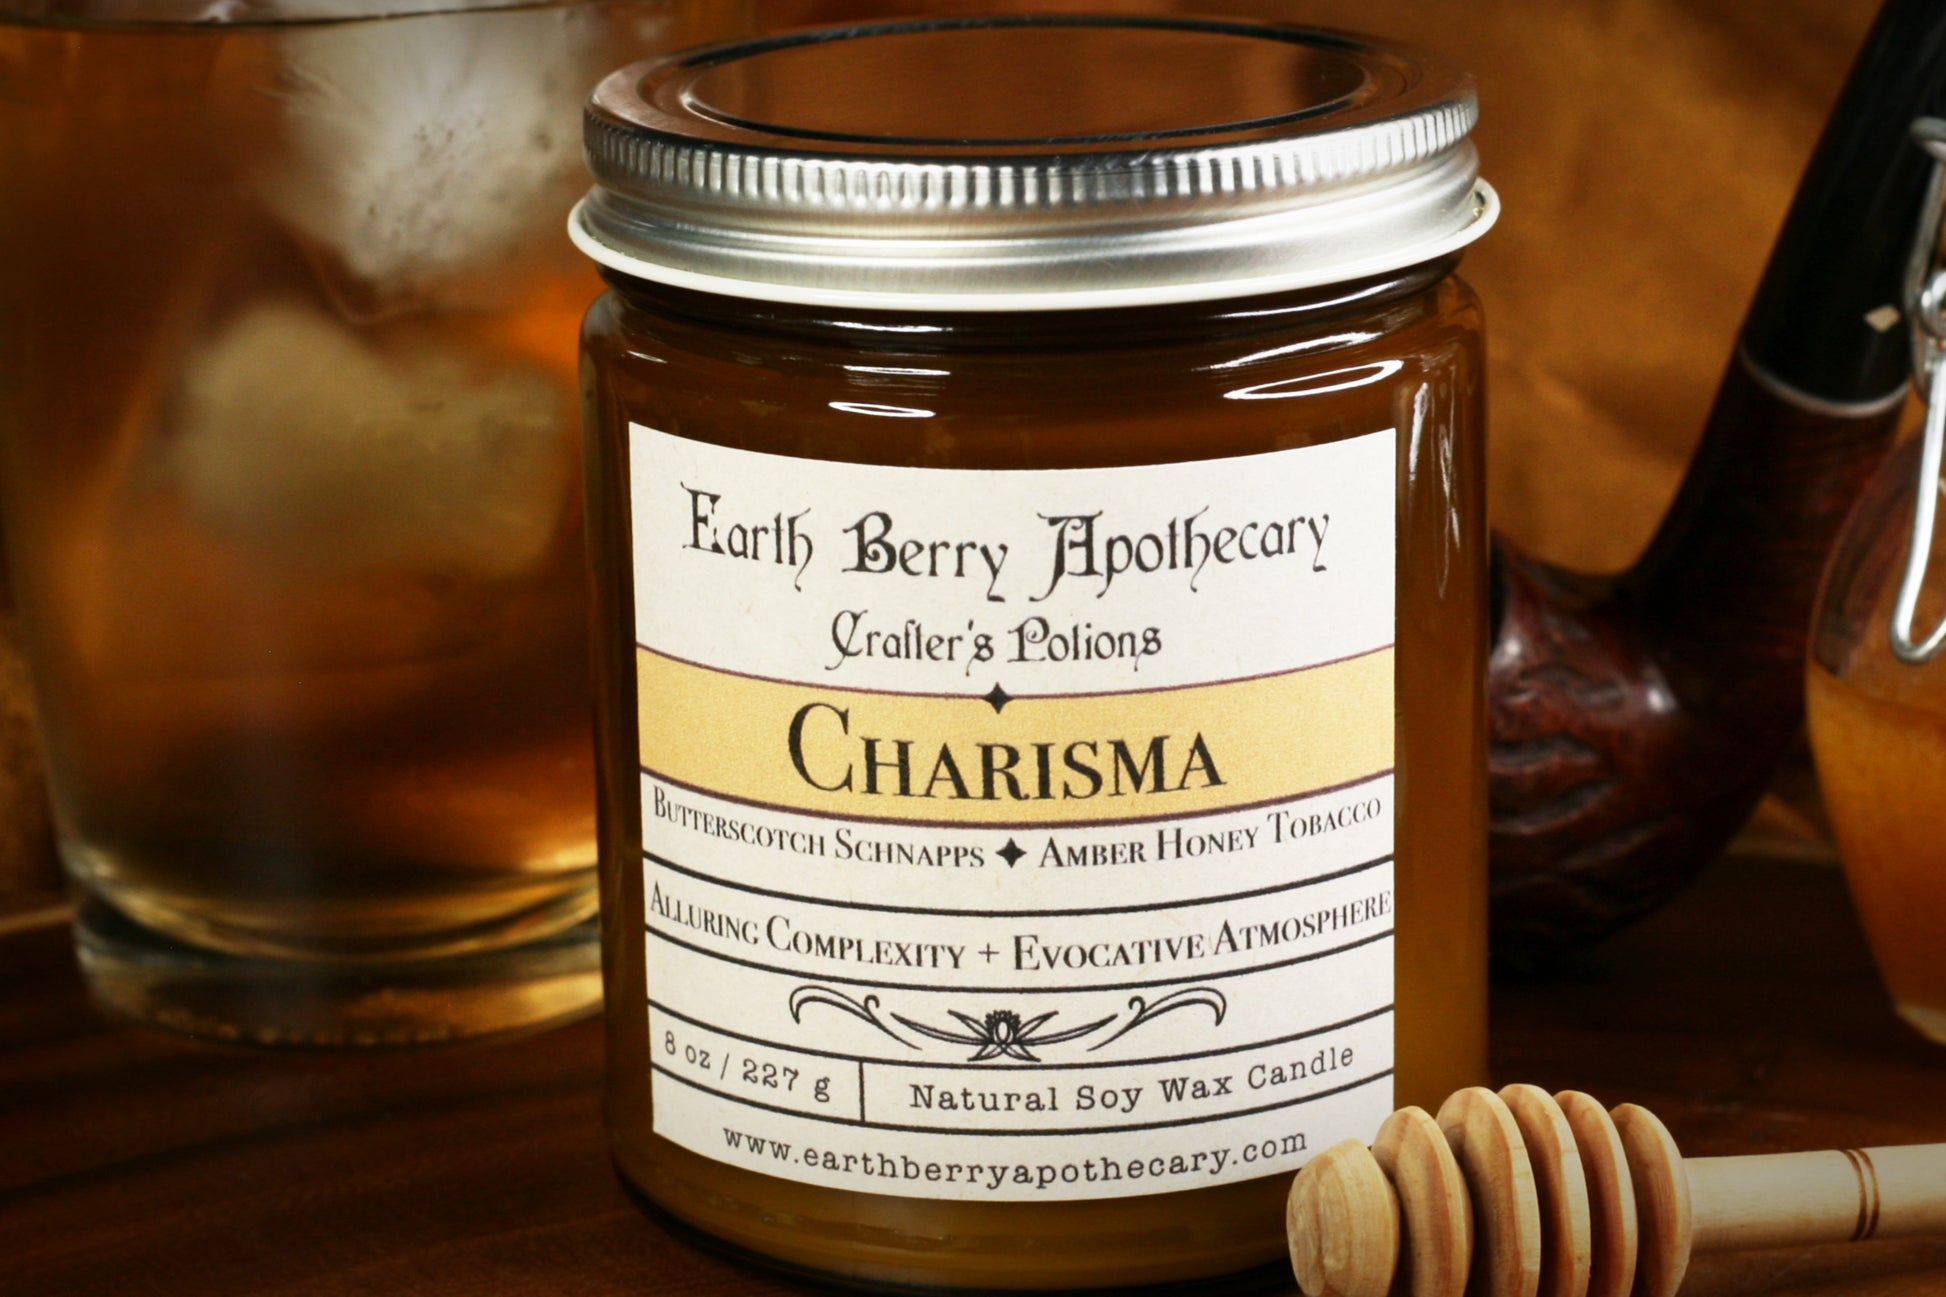 Charisma potion. Nontoxic soy candle with butterscotch bourbon schnapps and amber honey tobacco.